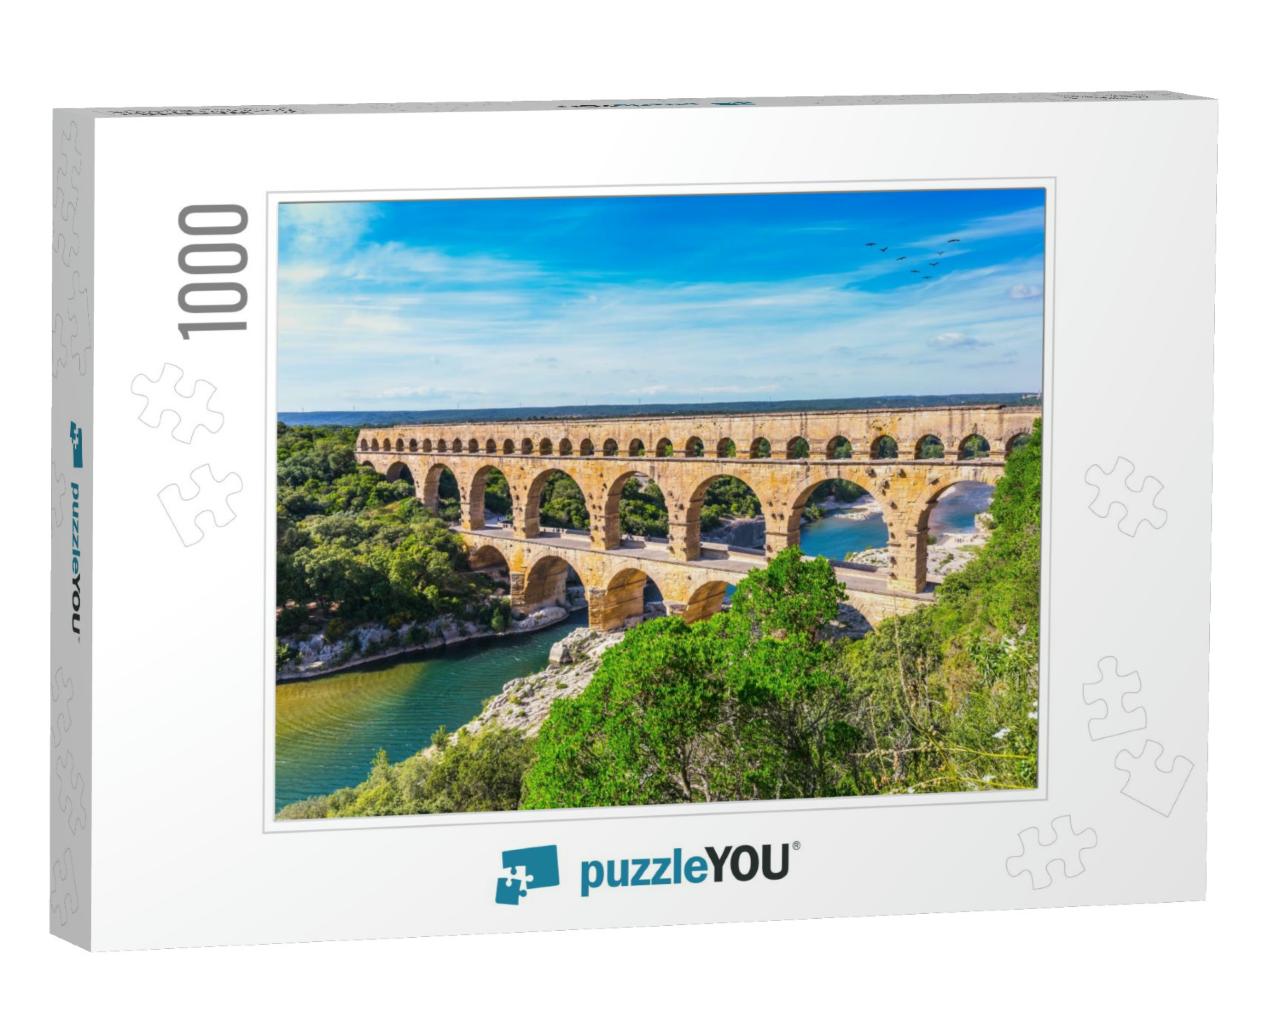 Three-Tiered Aqueduct Pont Du Gard Was Built in Roman Tim... Jigsaw Puzzle with 1000 pieces